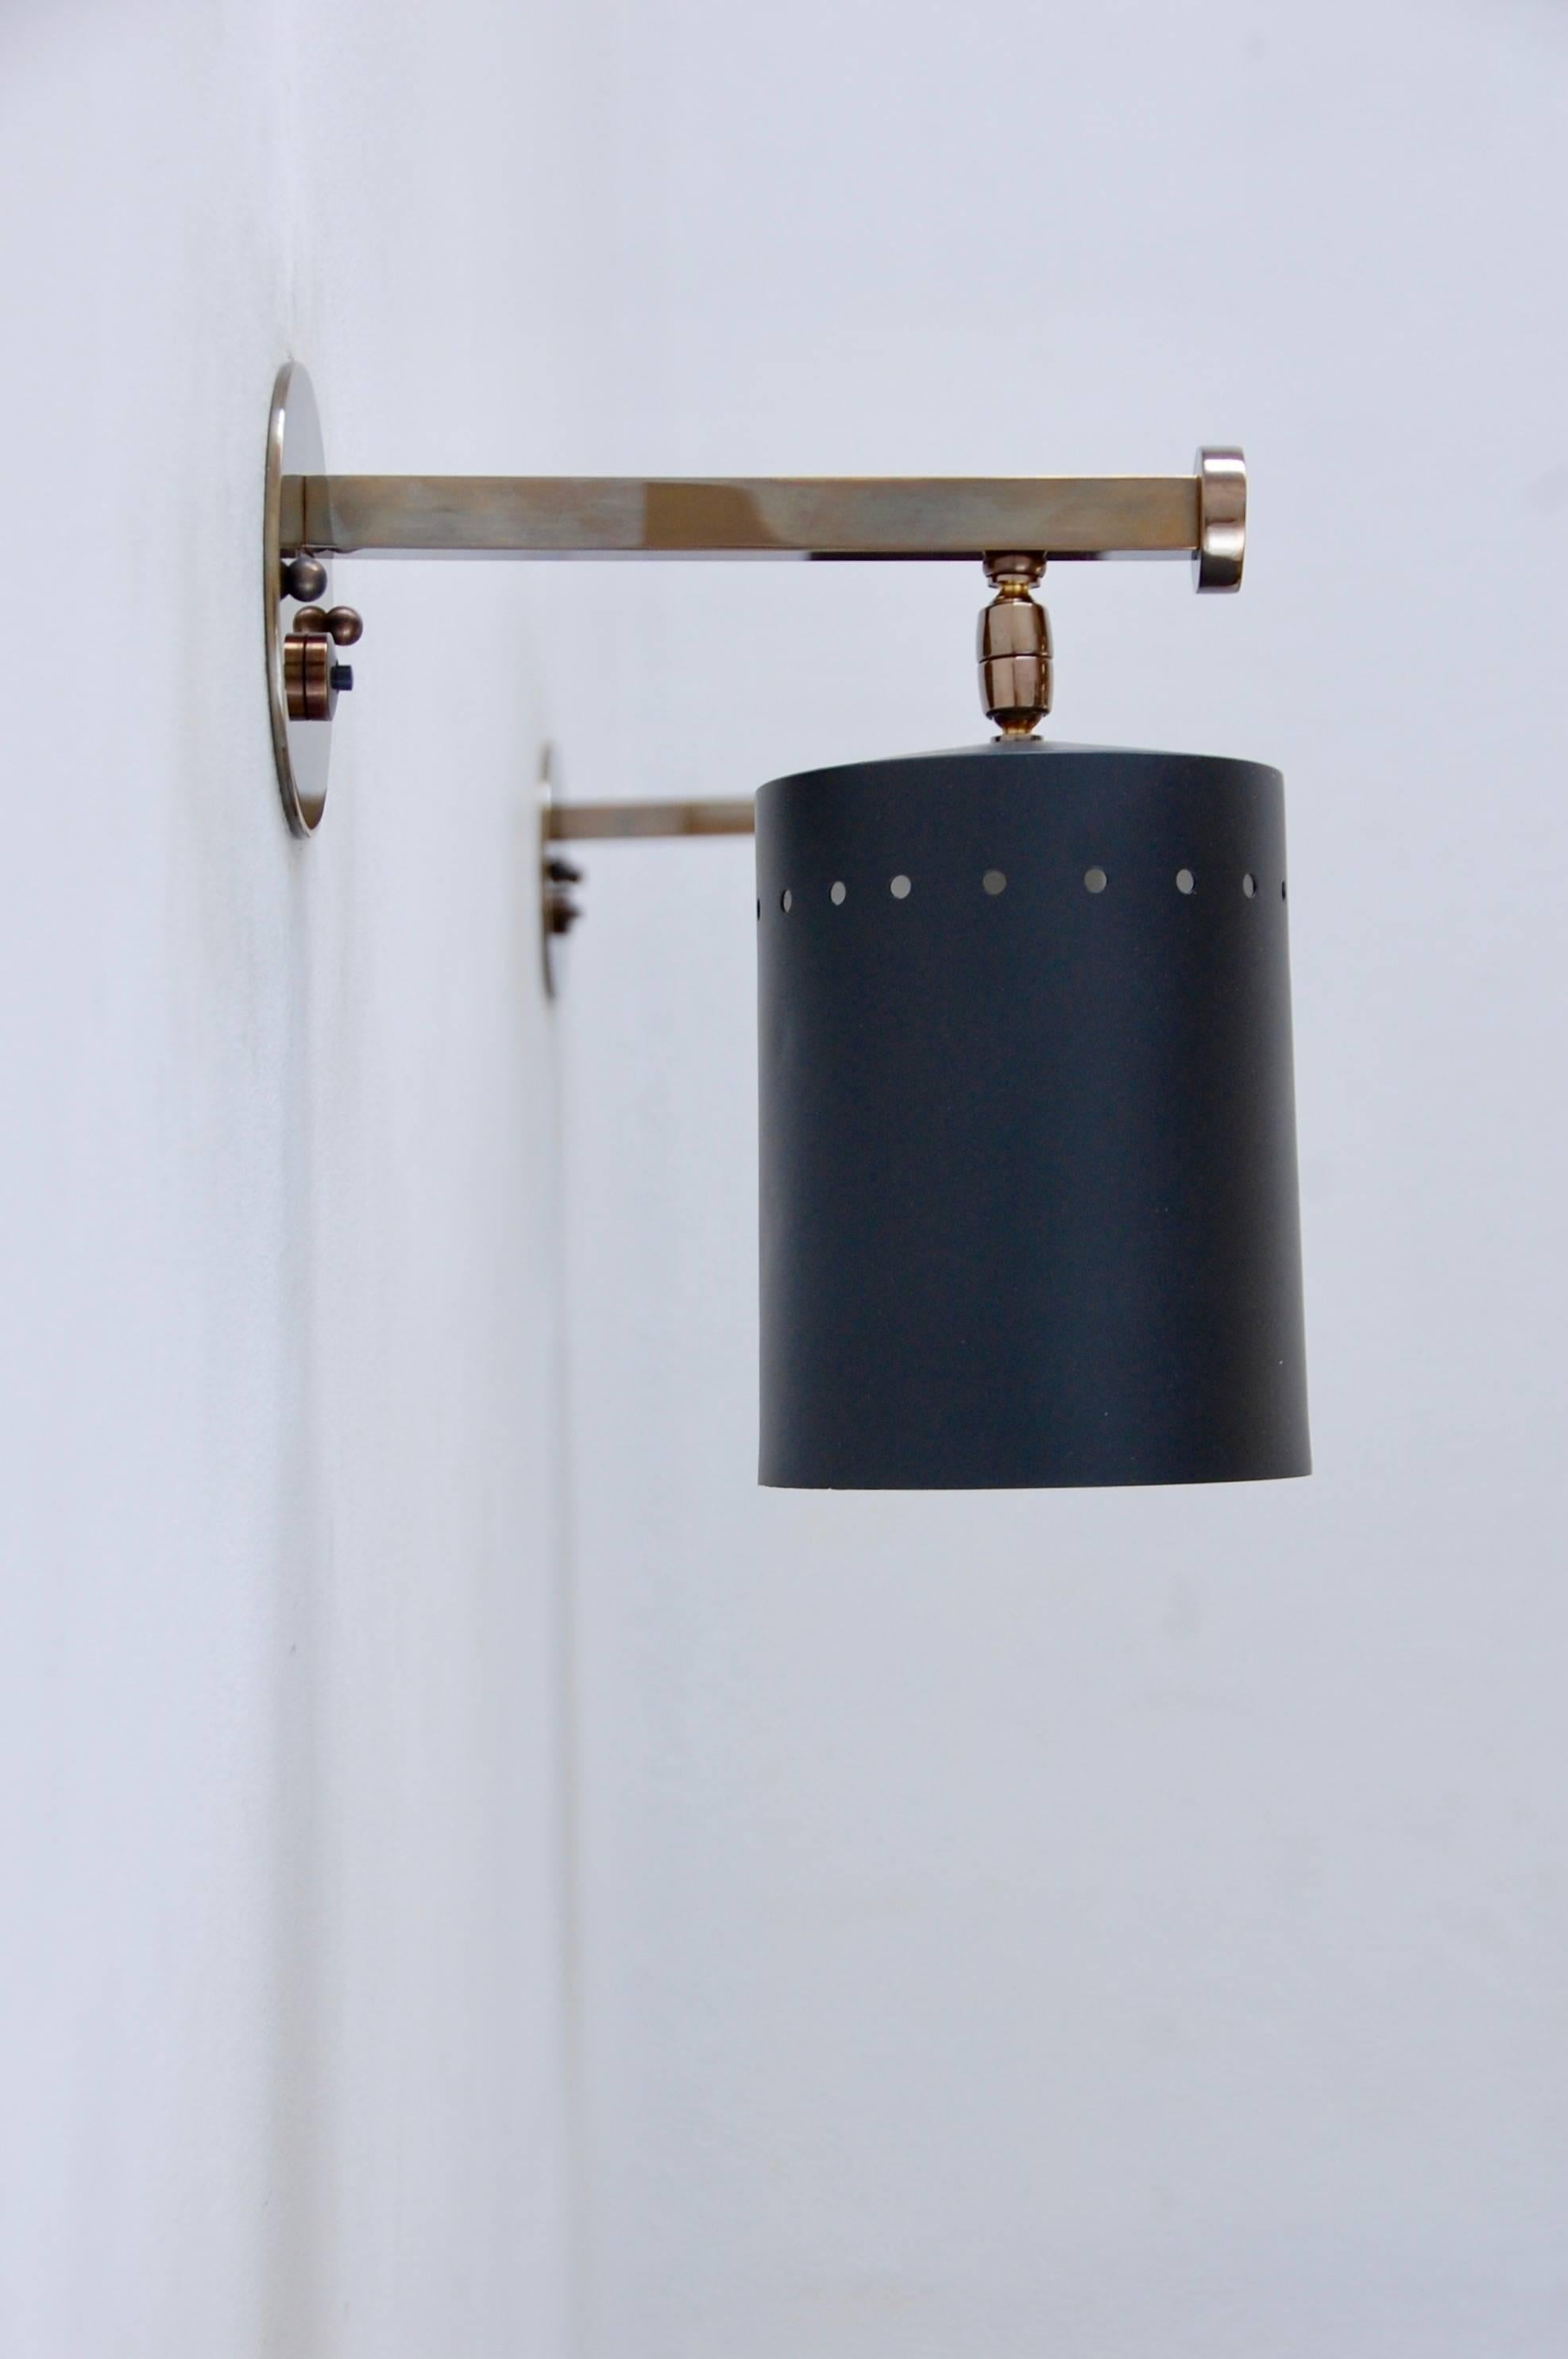 (2) wonderful Directional cylinder sconces that pivot generously for directed light. Patinated unlacquered brass, and painted aluminium. Rewired for use in the US. Priced individually.
Measures: Depth 8.75”
Height 10
Width 4.5”
Shade dimensions 4.5”